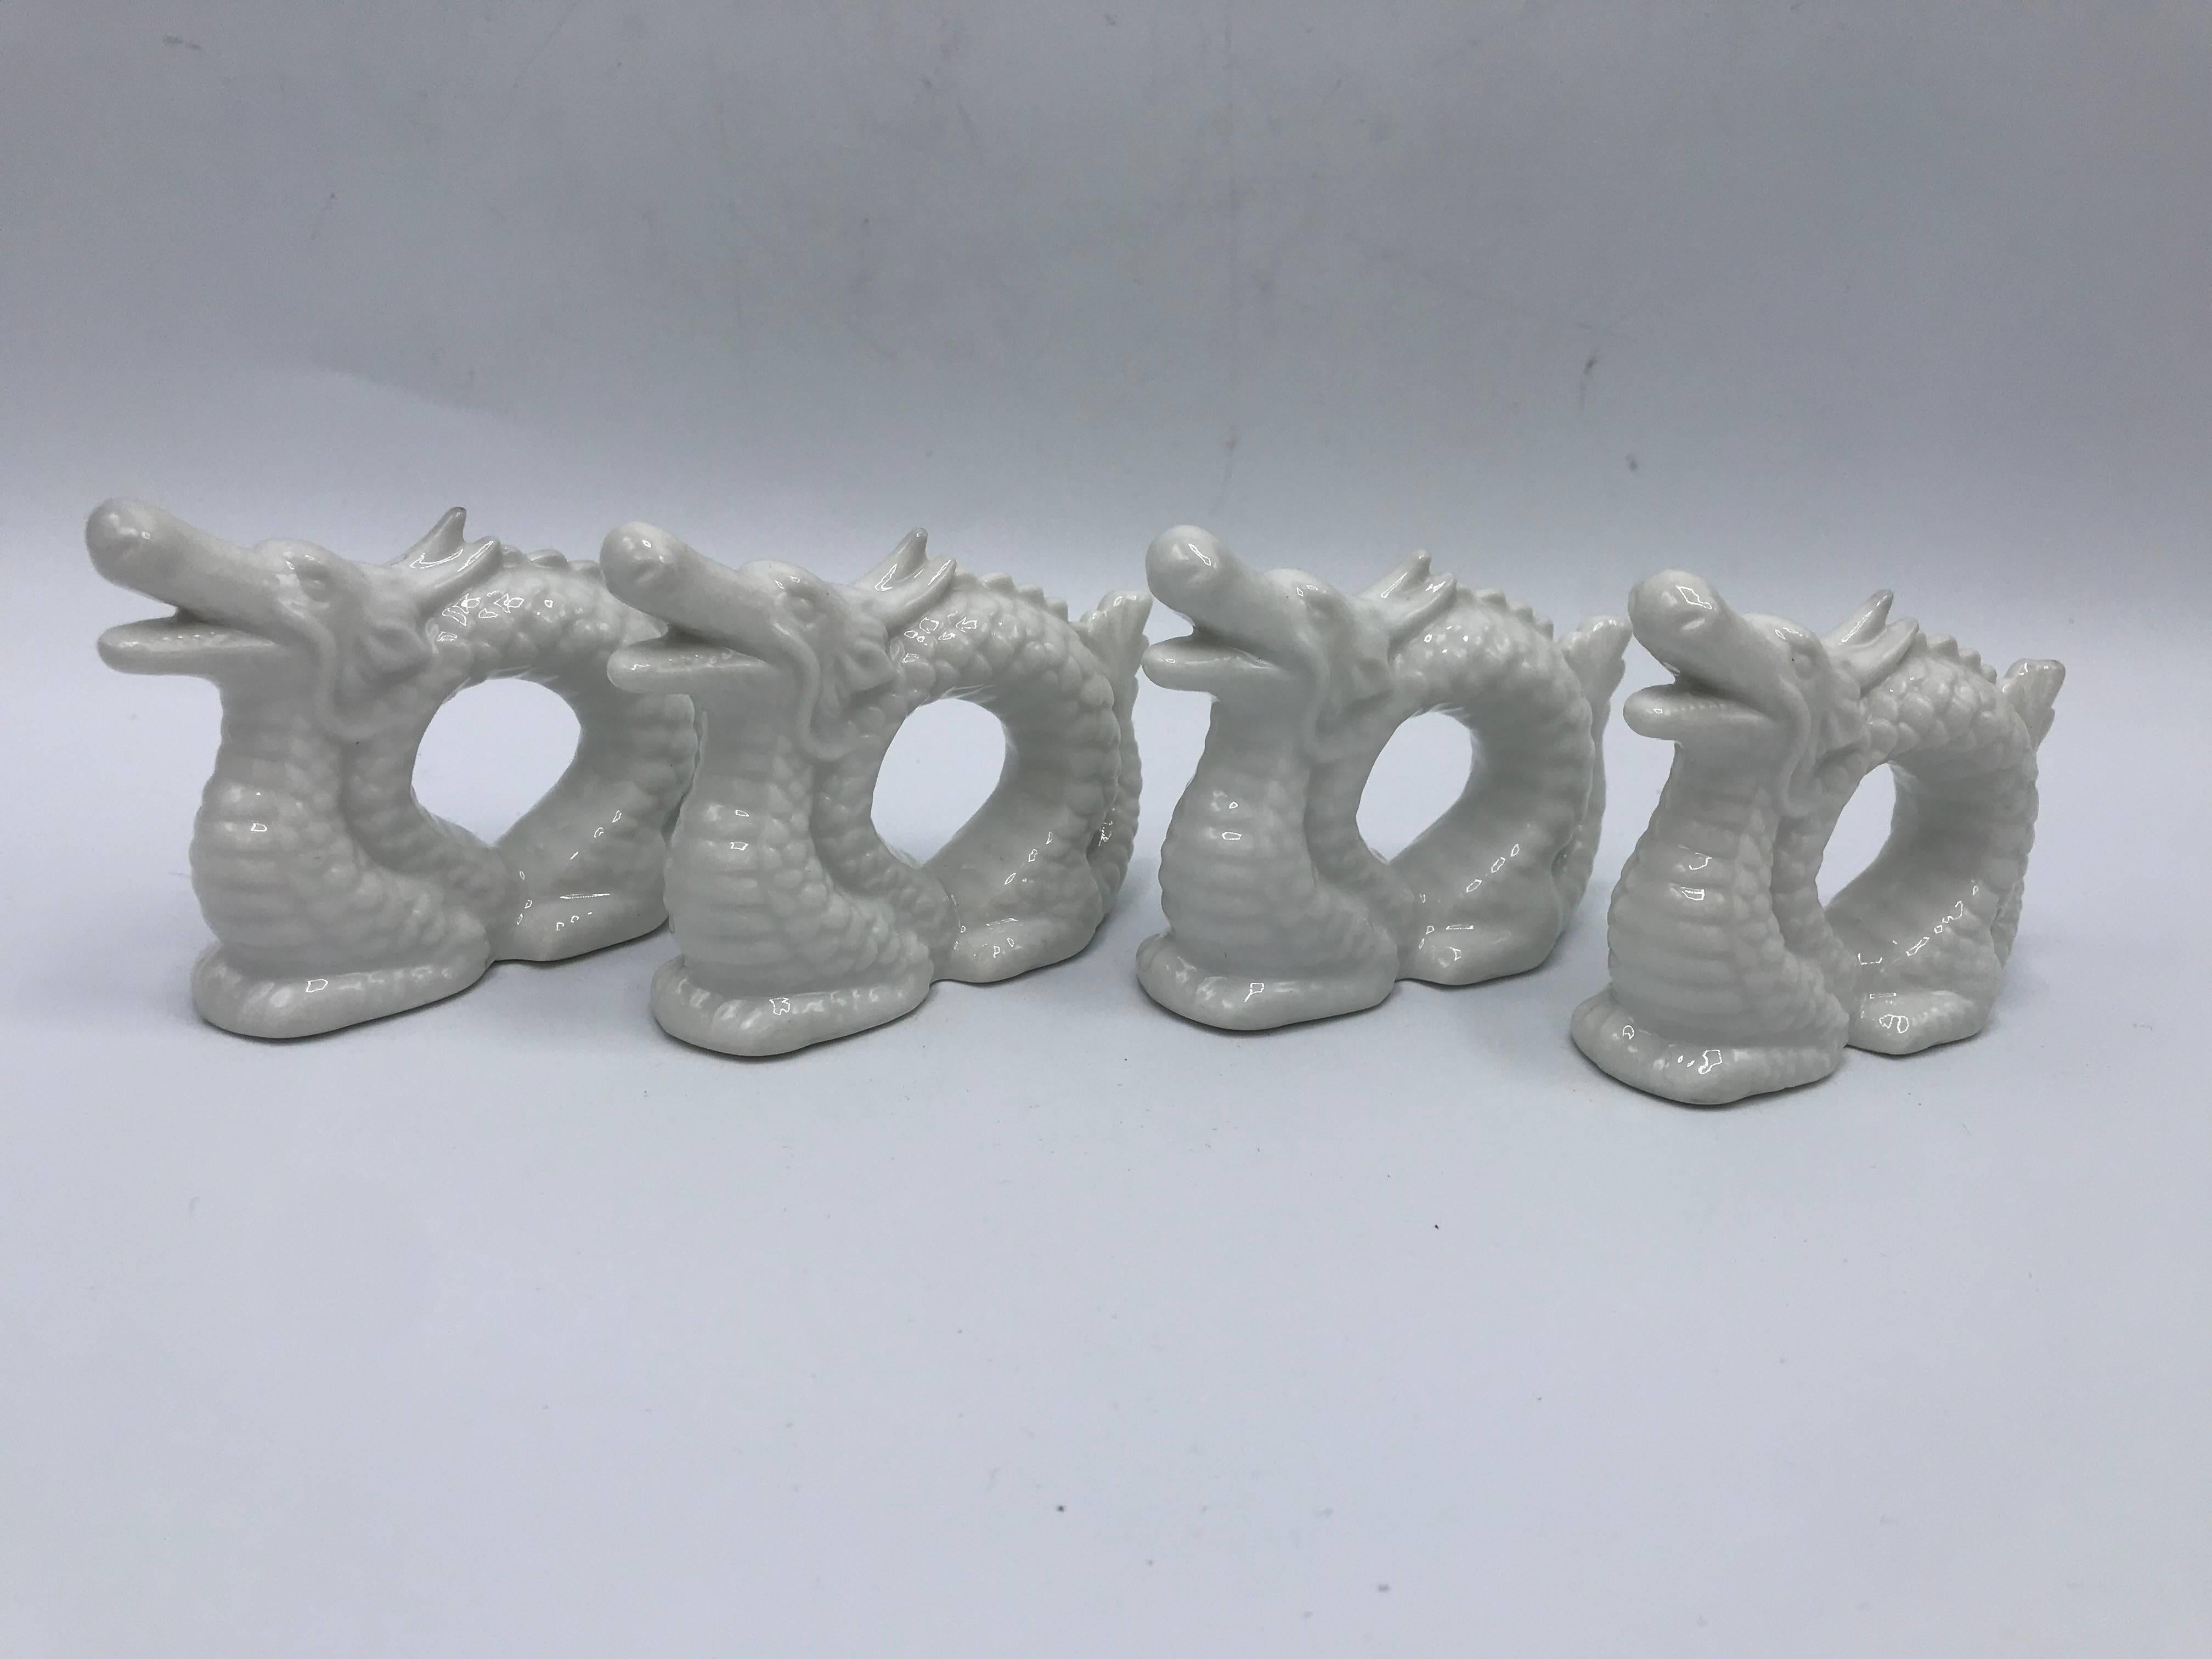 Offered is a beautiful, set of four, 1960s Blanc de Chine porcelain dragon sculpture napkin rings.